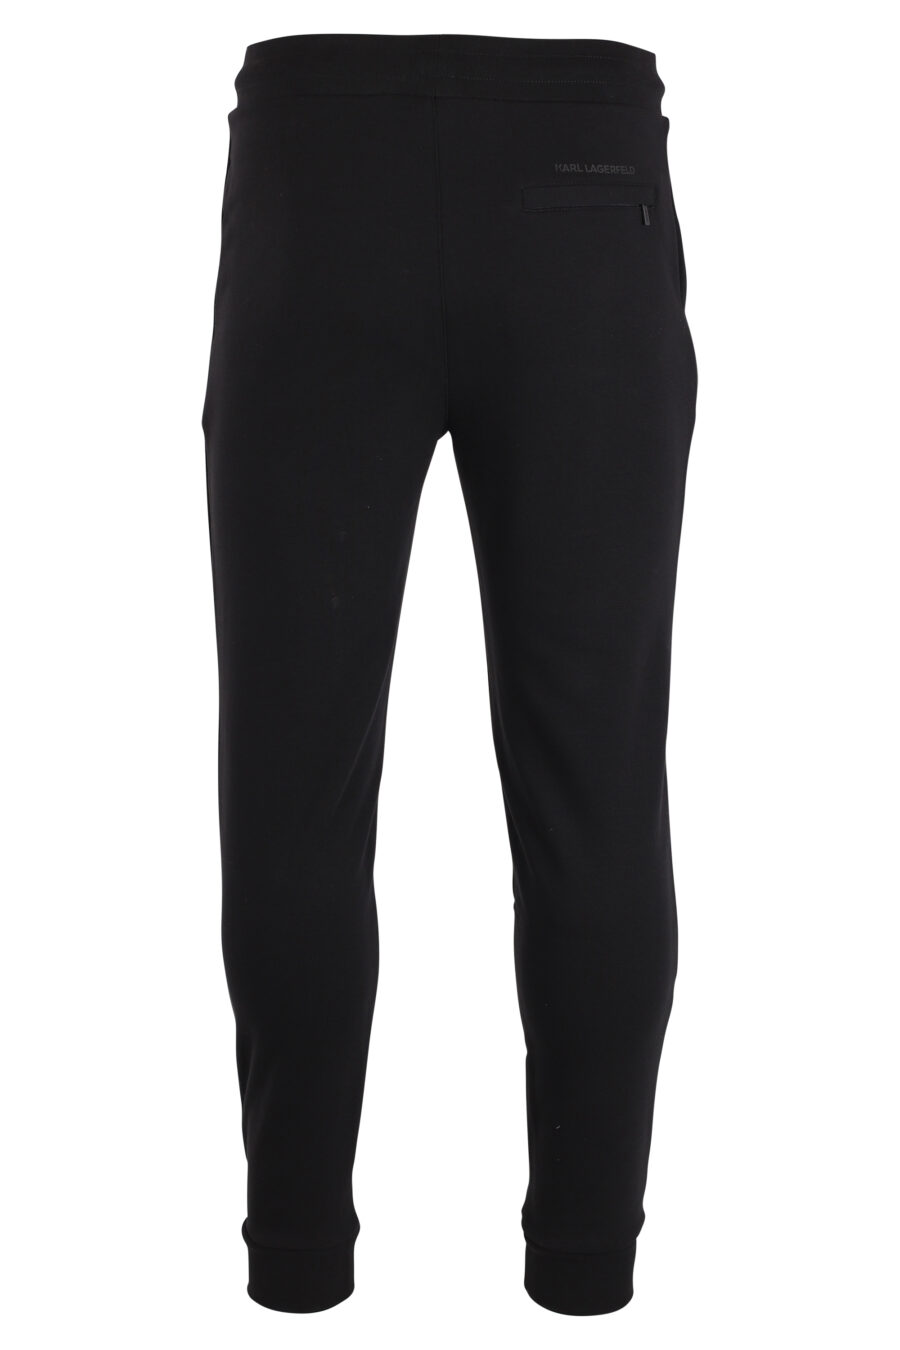 Tracksuit bottoms black with mini rubber logo - IMG 4102